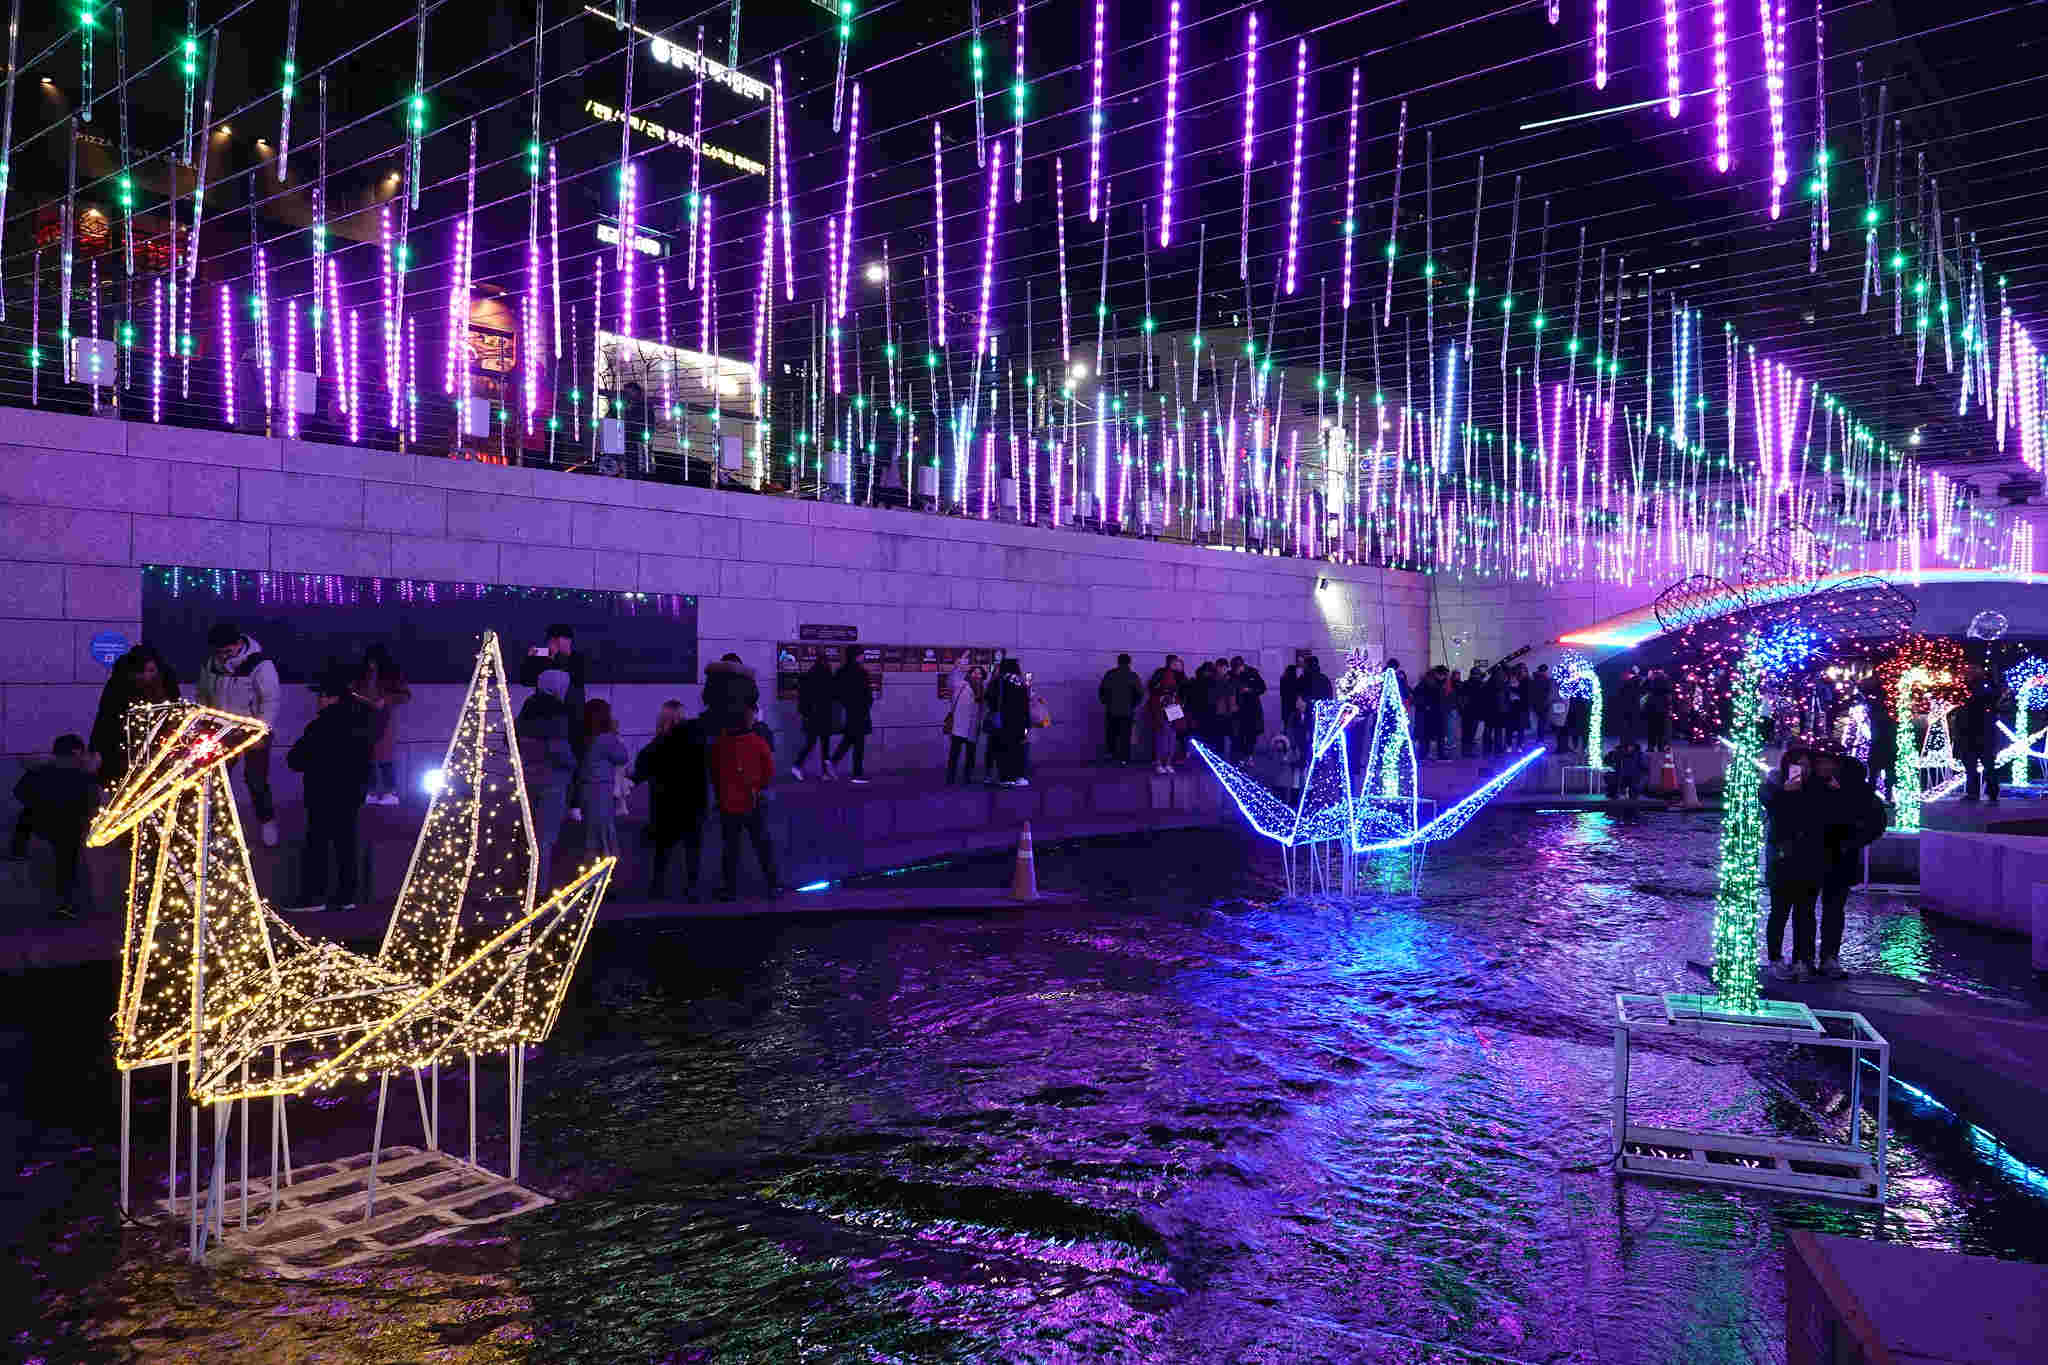 Seoul then and now - Cheonggyecheon stream, Christmas festival